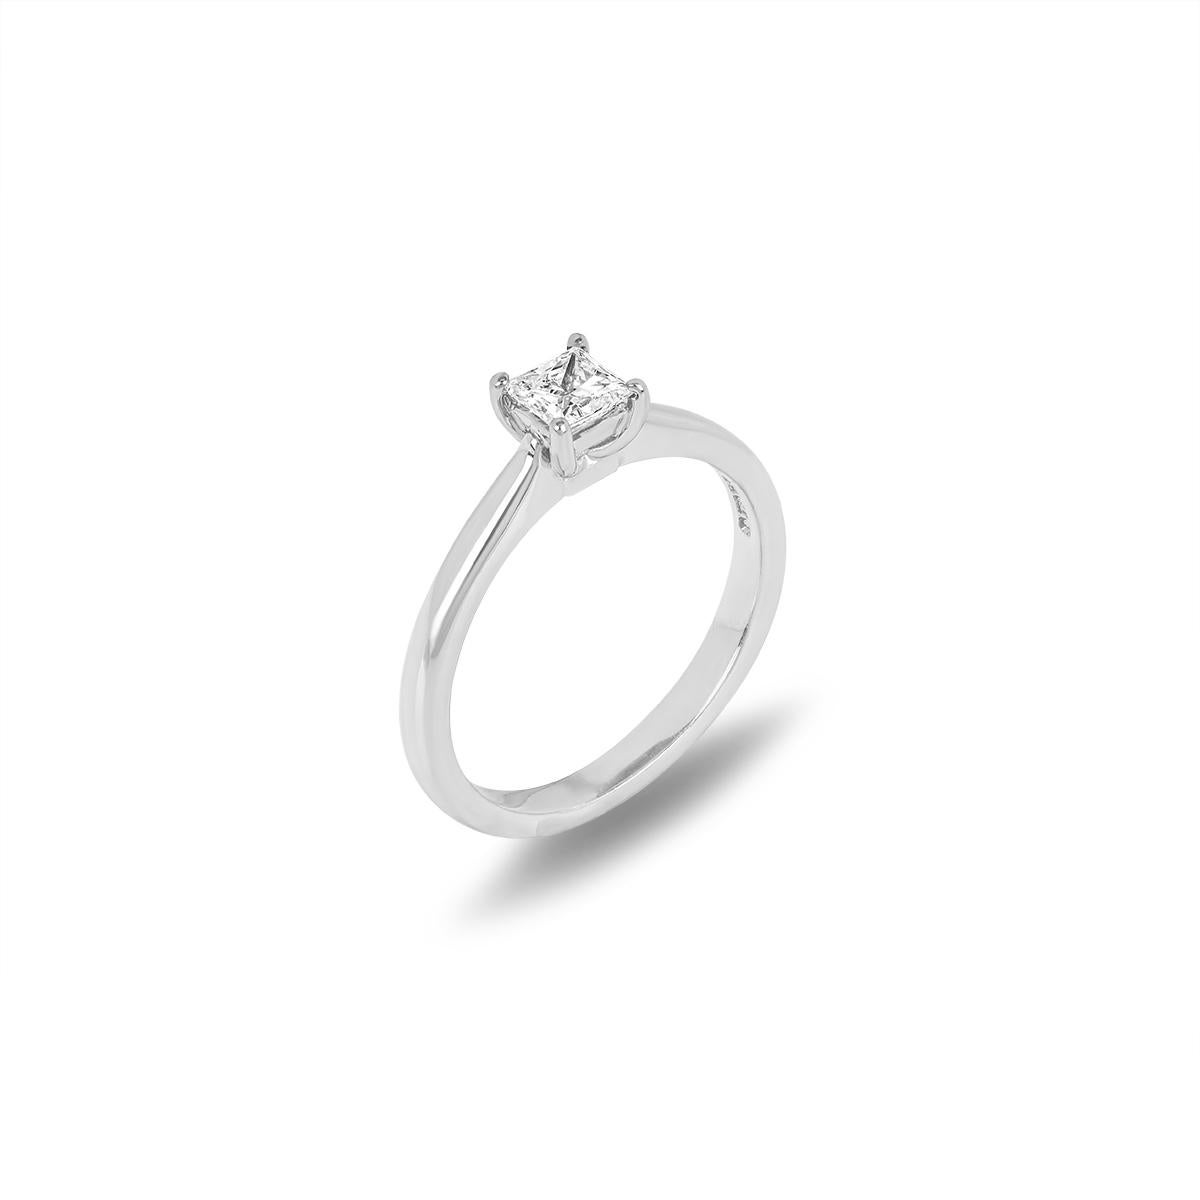 A beautiful single stone diamond ring in 18k white gold. The engagement ring is set to the centre in a four prong mount with a princess cut diamond weighing 0.30ct, H colour and VS1 clarity. The 2mm solitaire has a gross weight of 3.20 grams and is